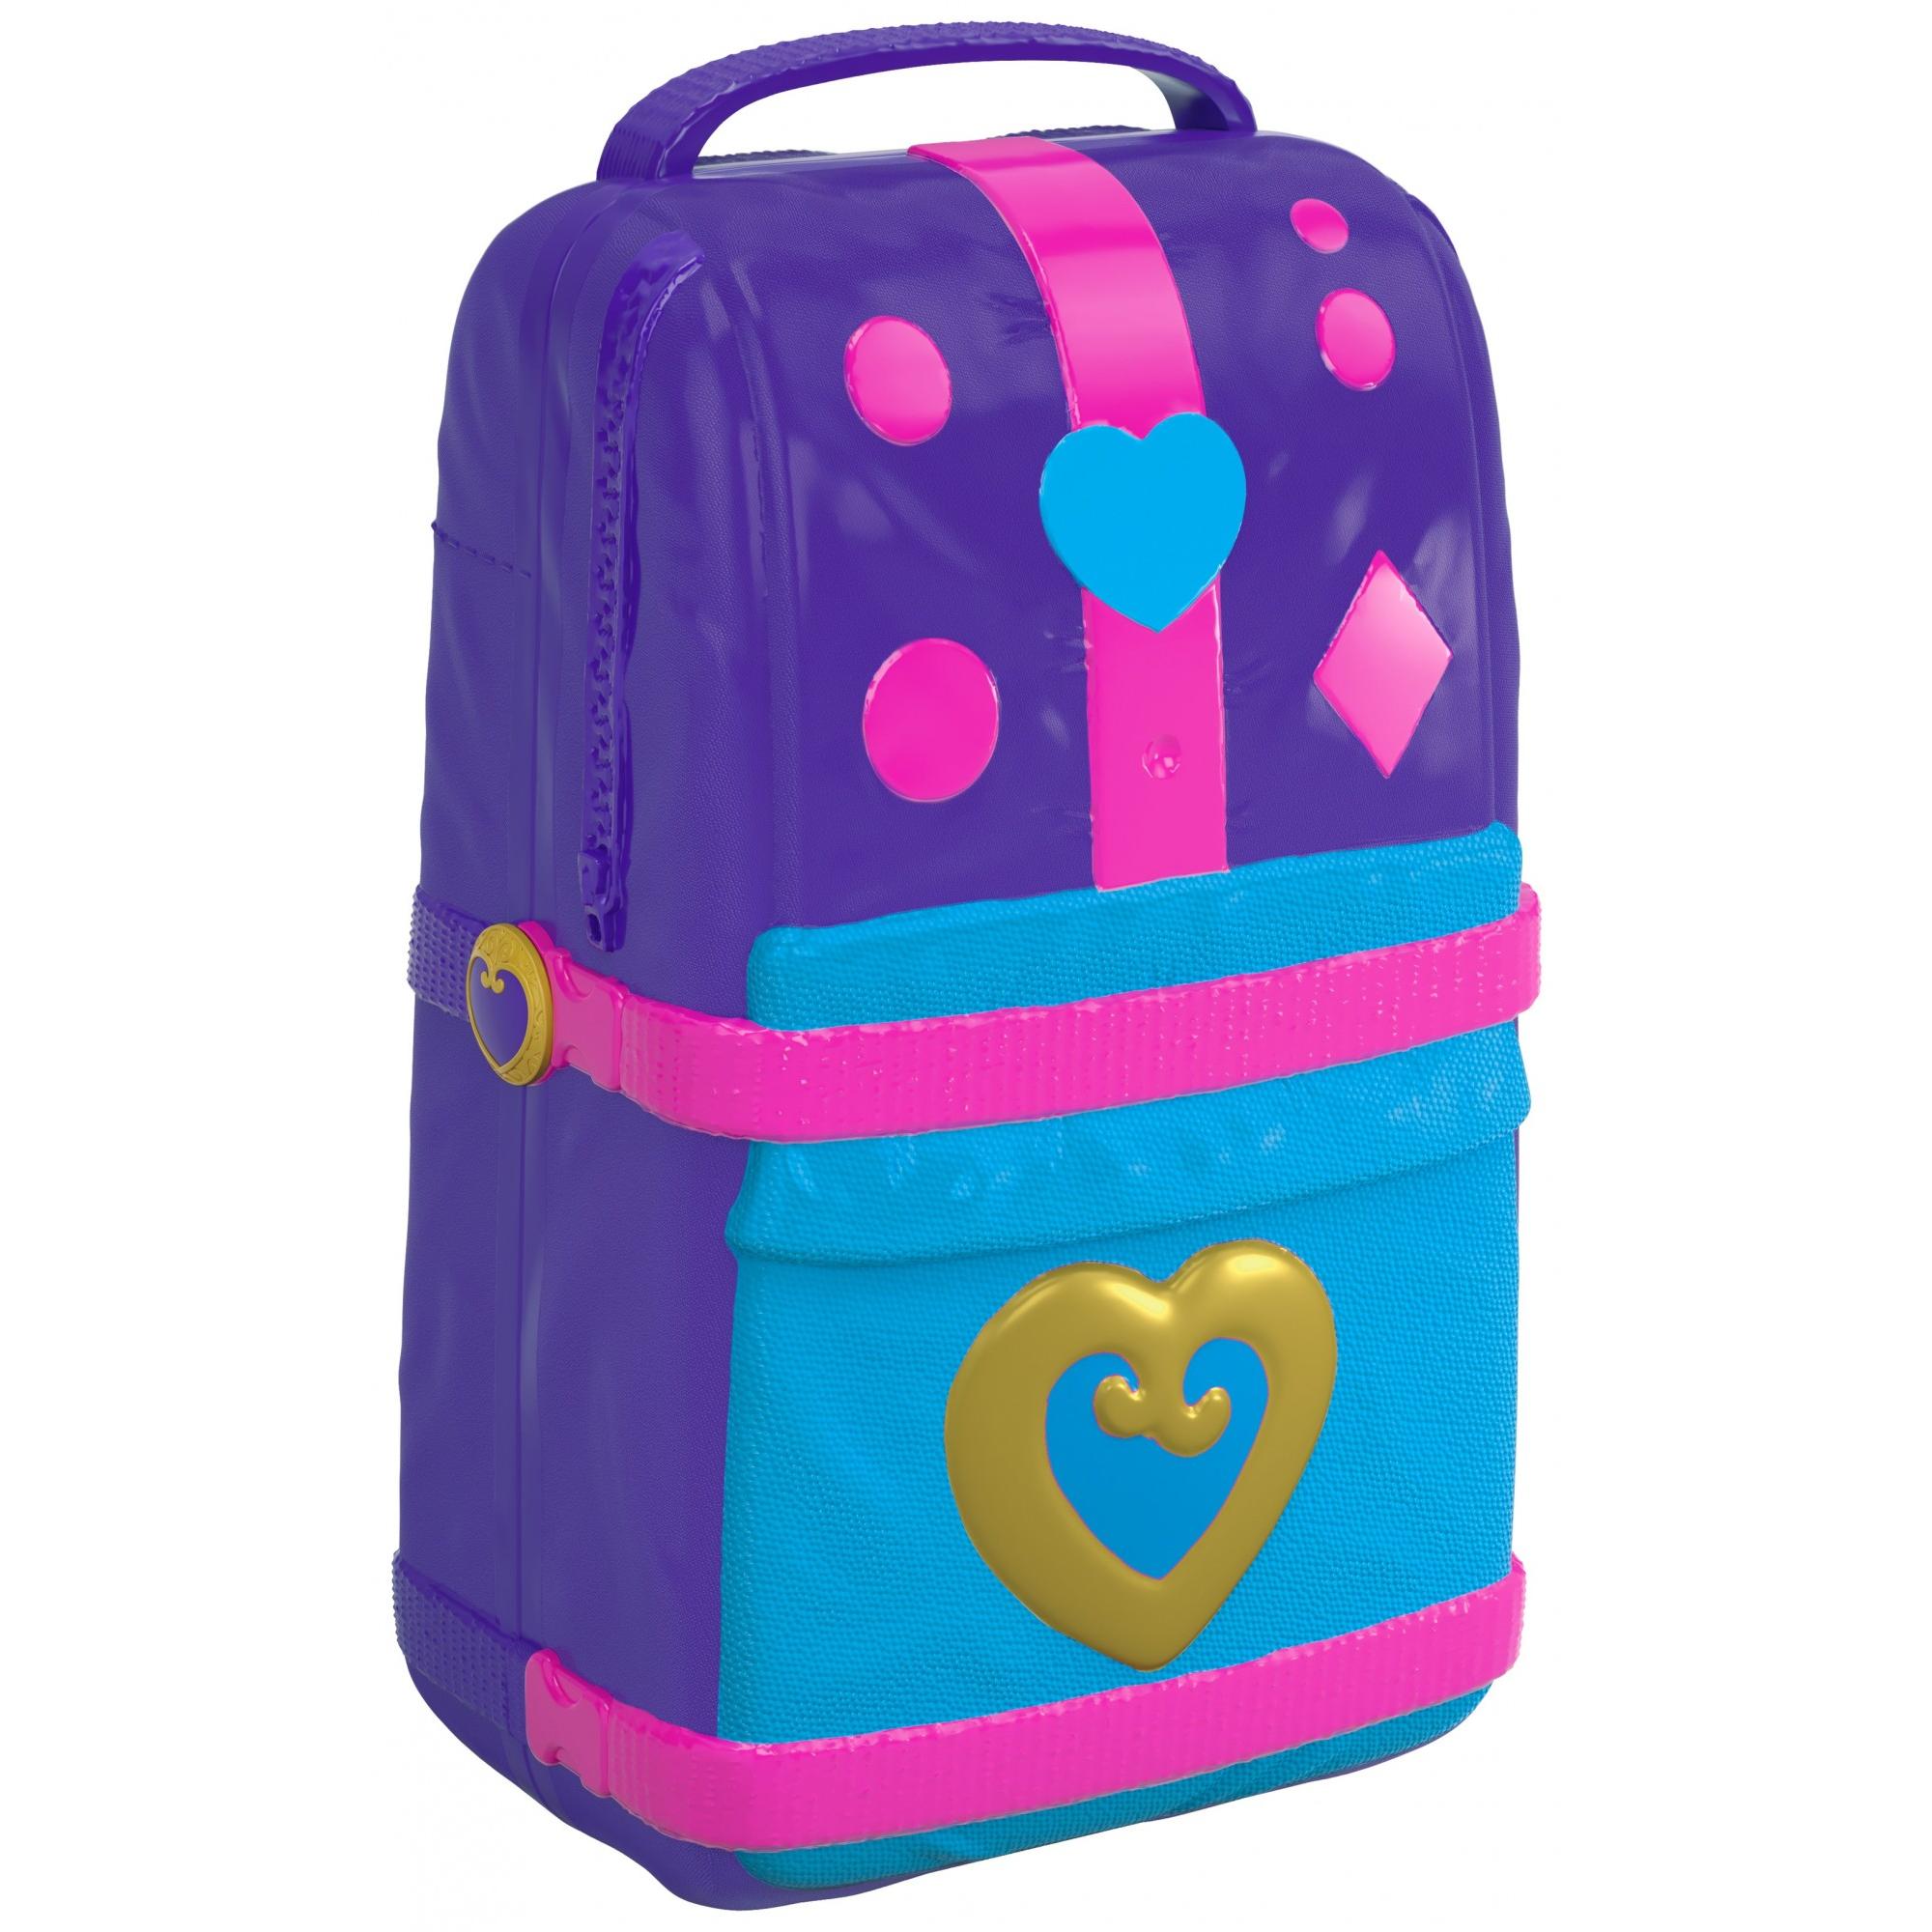 Polly Pocket Hidden Places Beach Vibes Backpack Compact with 2 Dolls - image 4 of 10